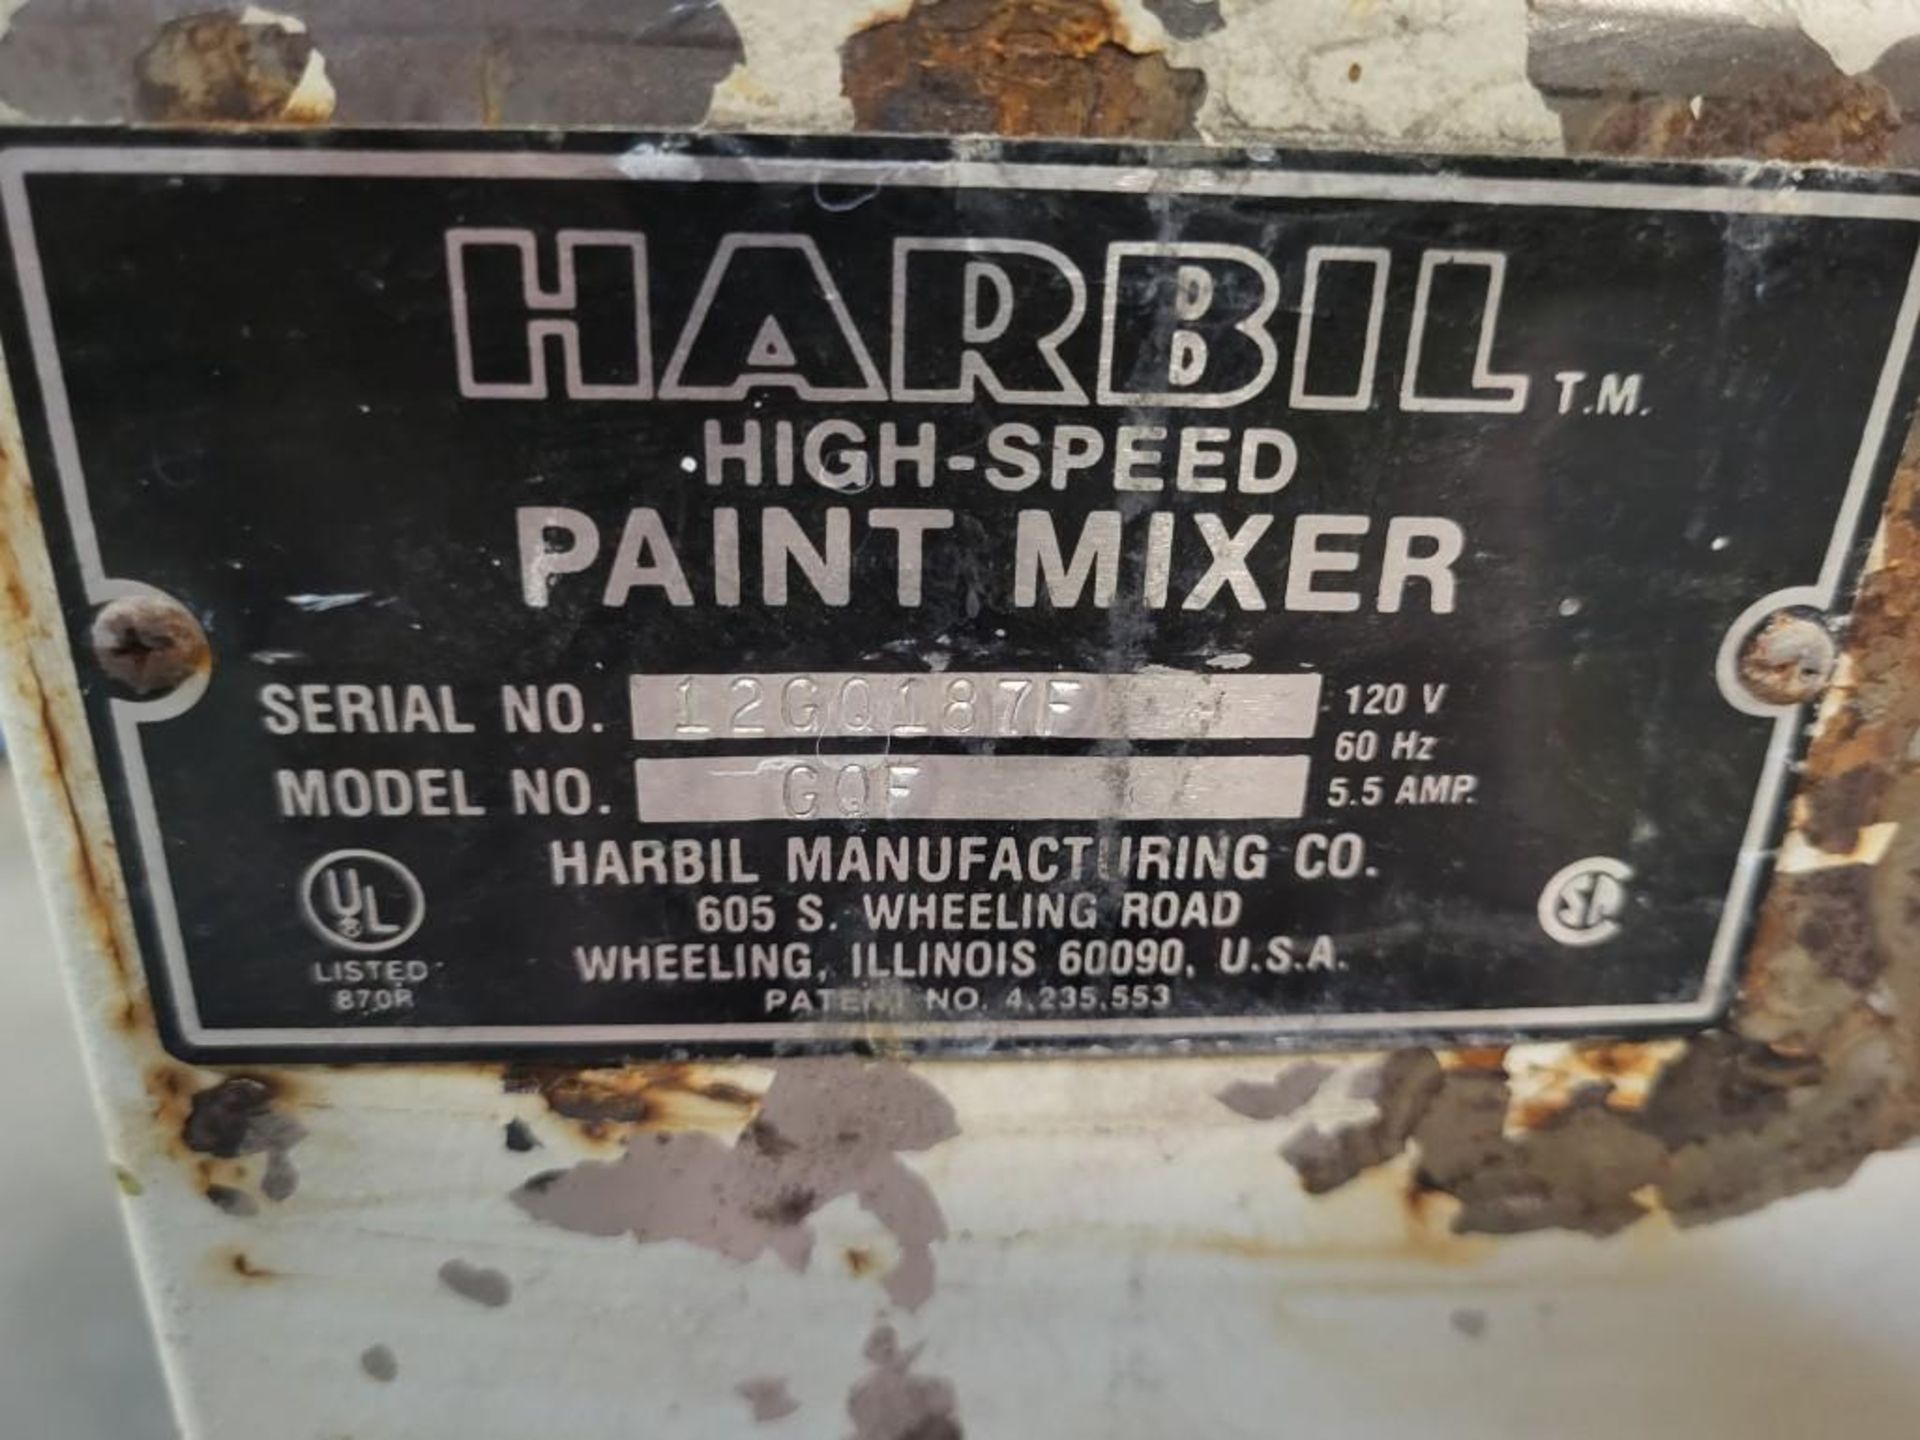 Harbill High-Speed Paint Mixer M/N 12G0187F - Image 5 of 5